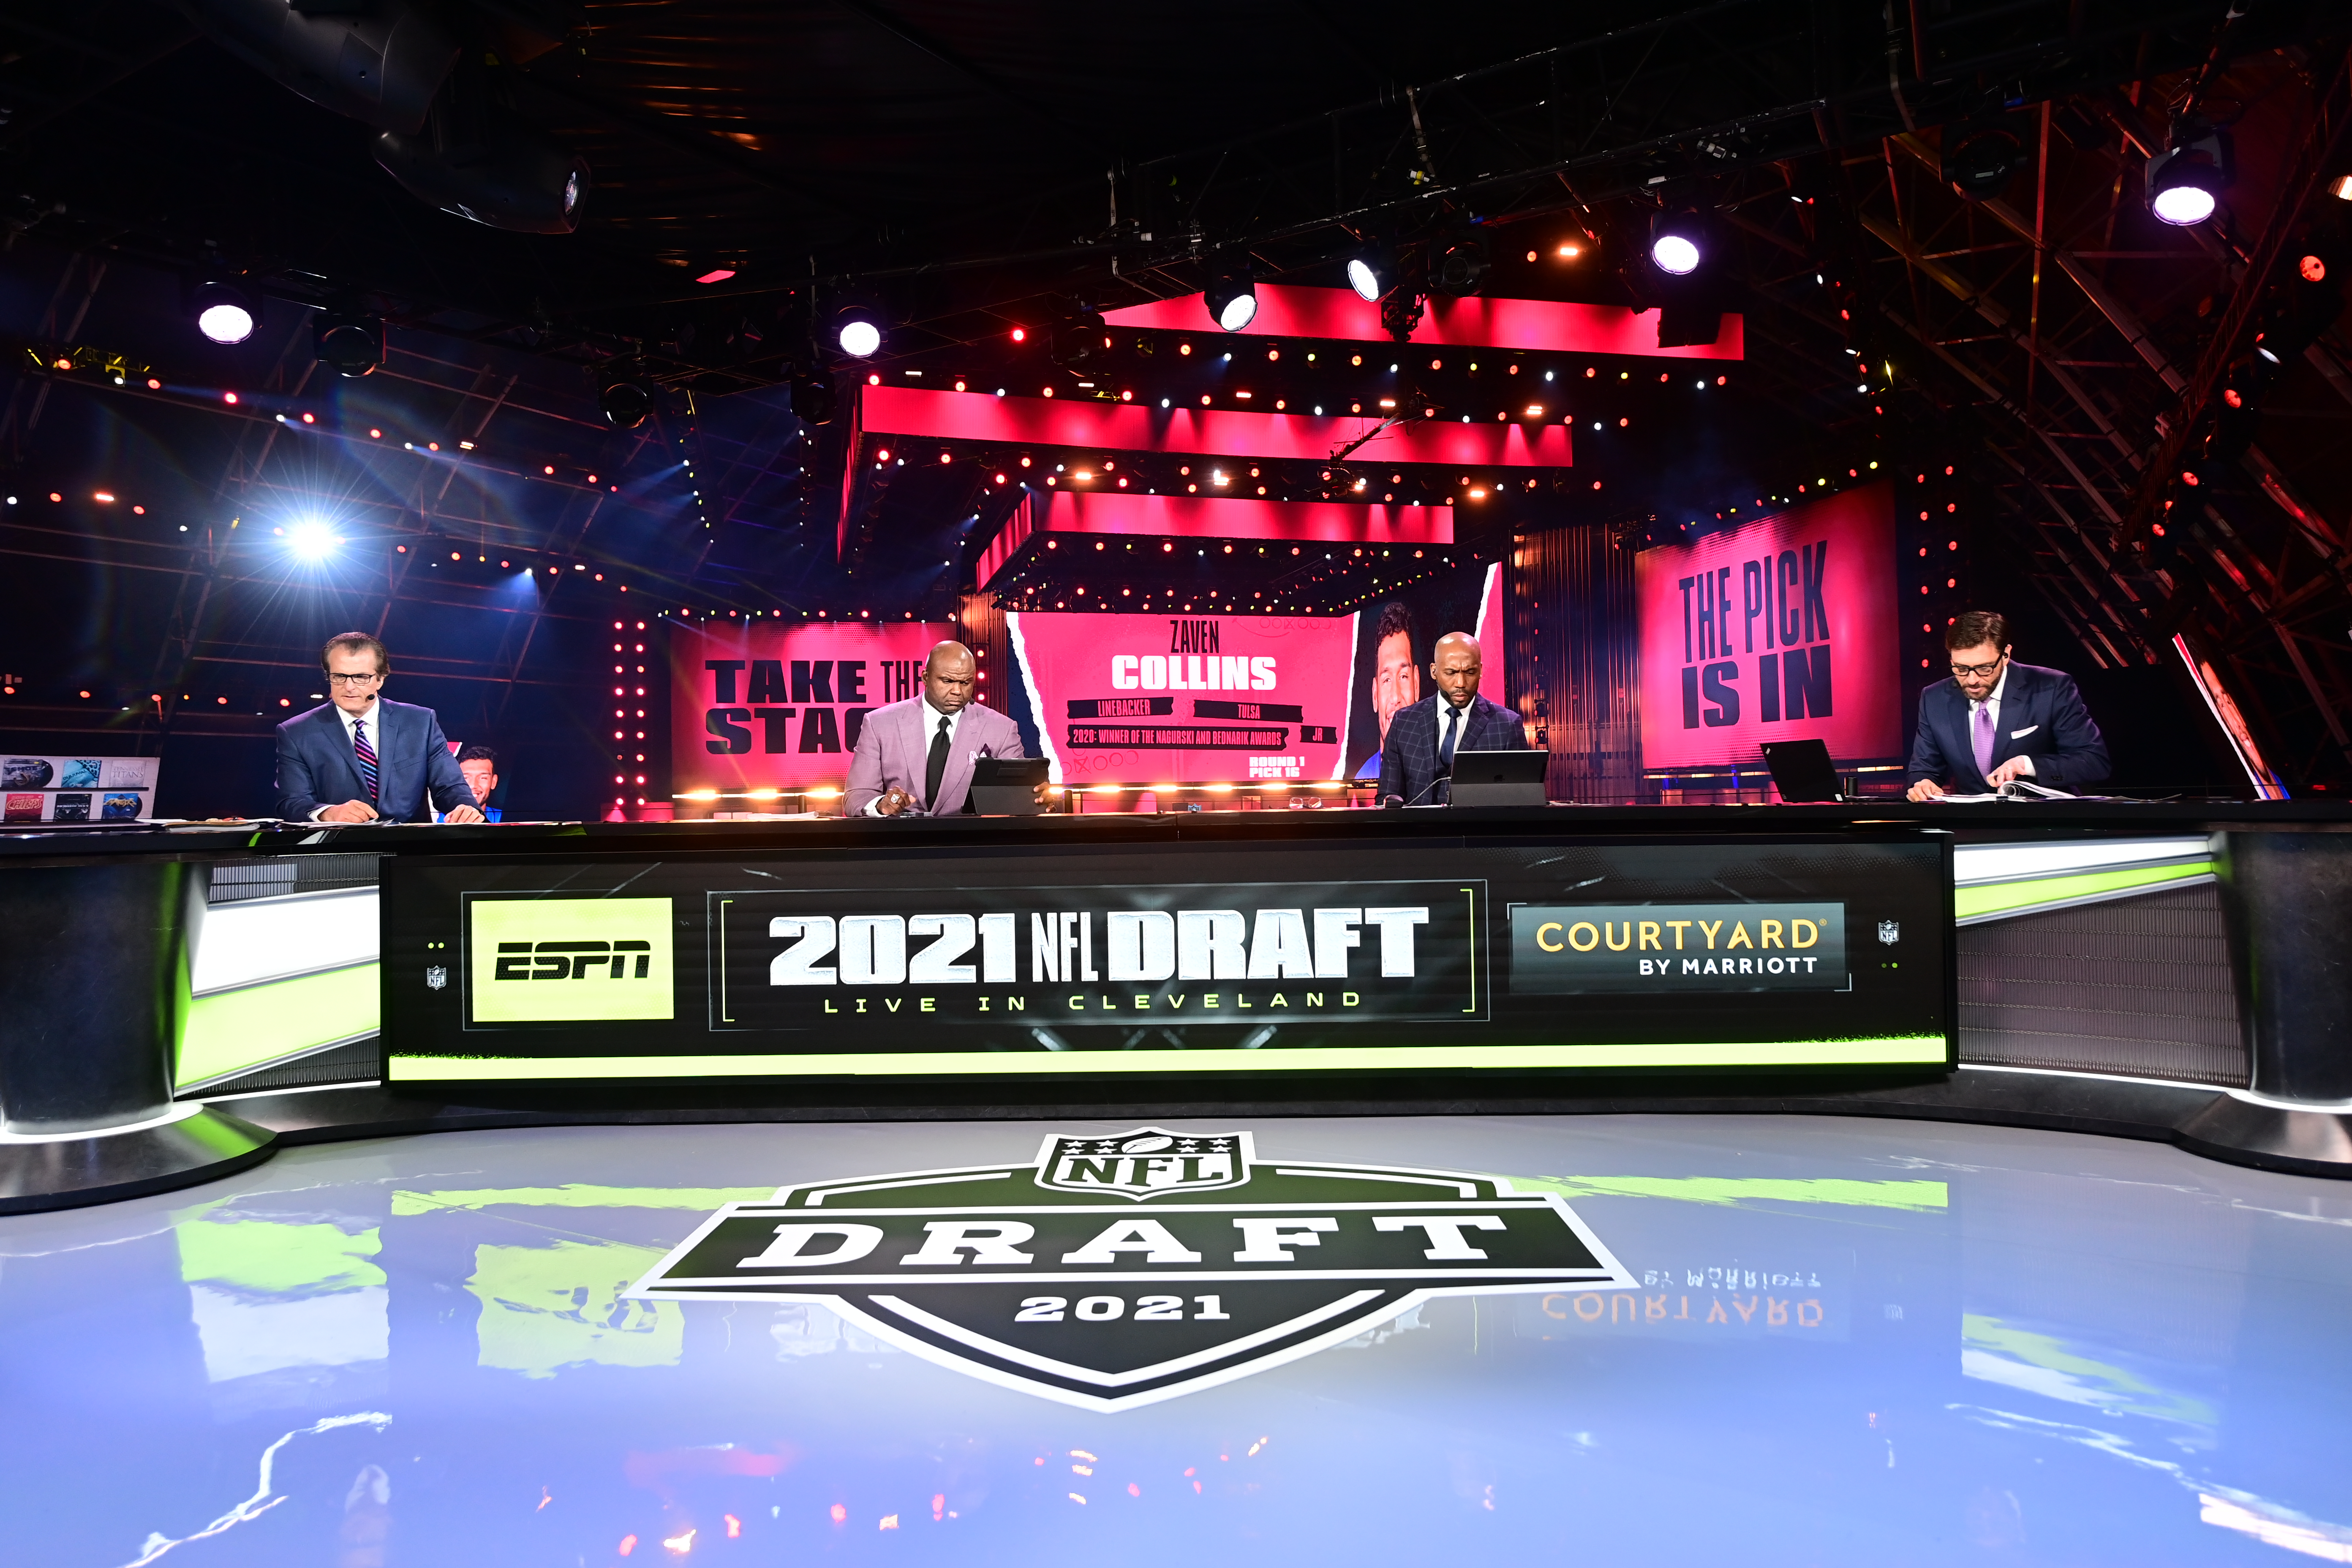 NFL Draft 2021 Day 2: Free live stream, time, TV, channel (4/30/21)